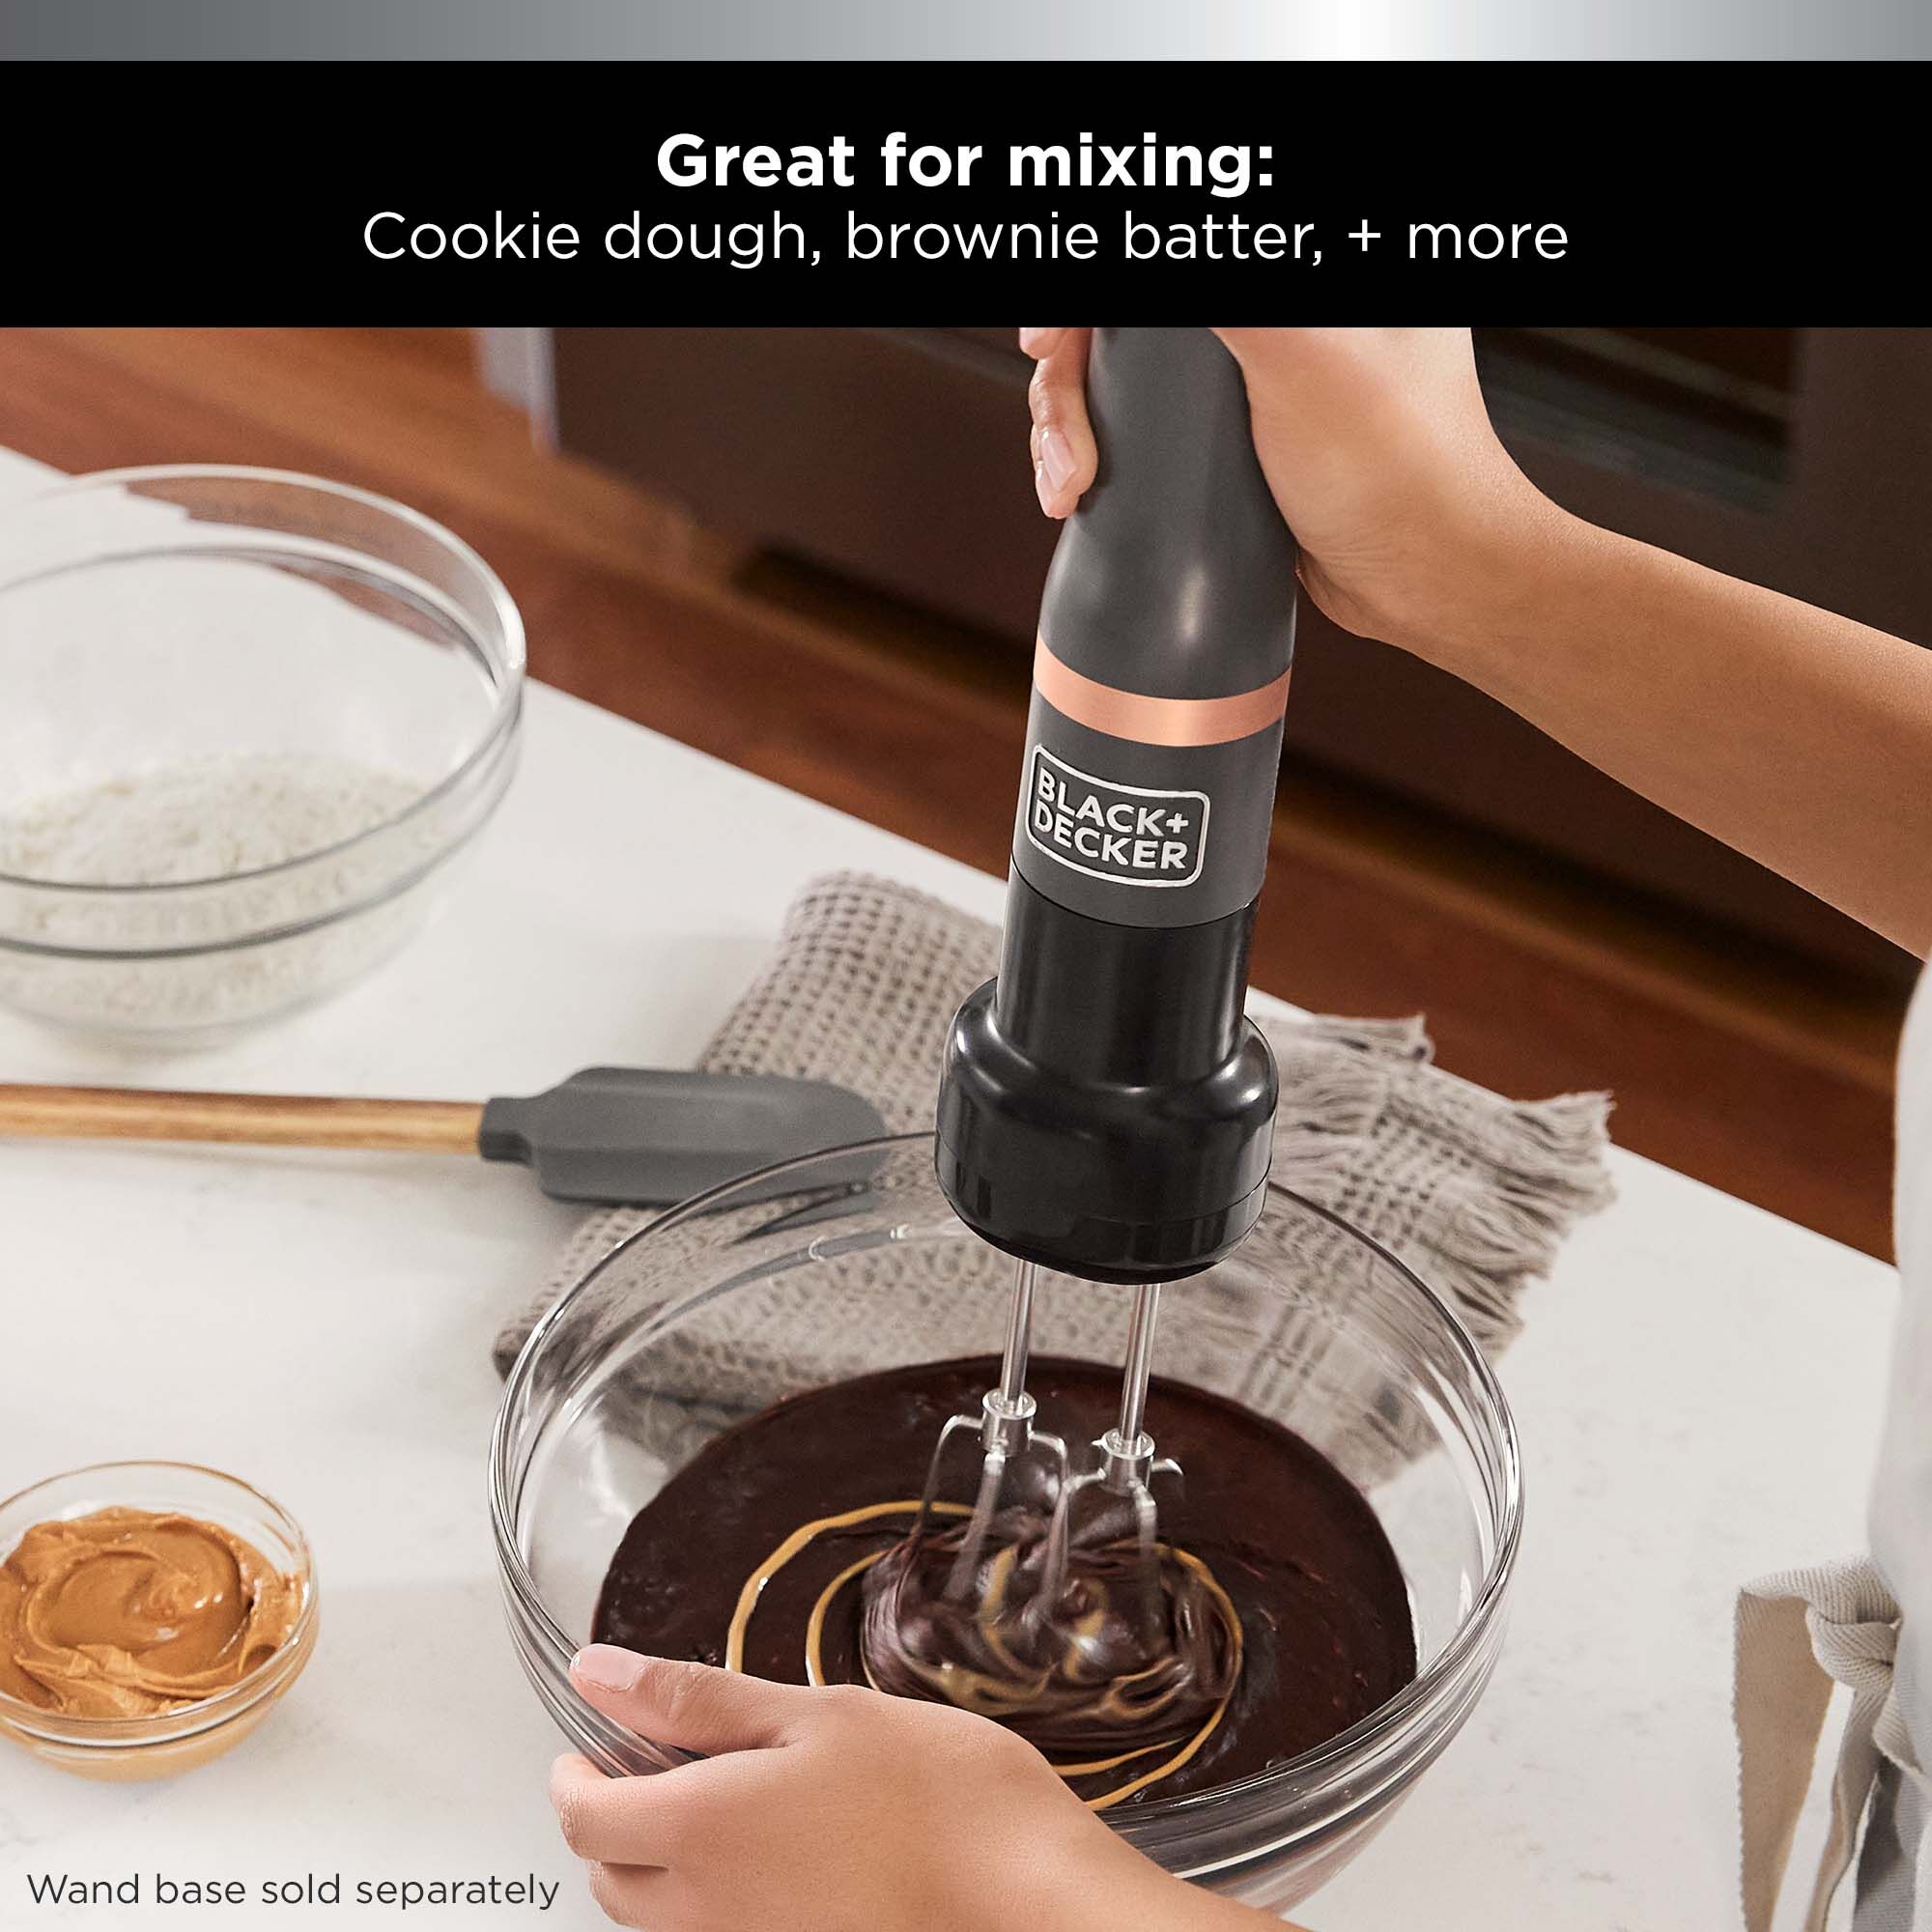 The BLACK+DECKER kitchen wand™ hand mixer attachment is great for mixing cookie dough, brownie batter and more